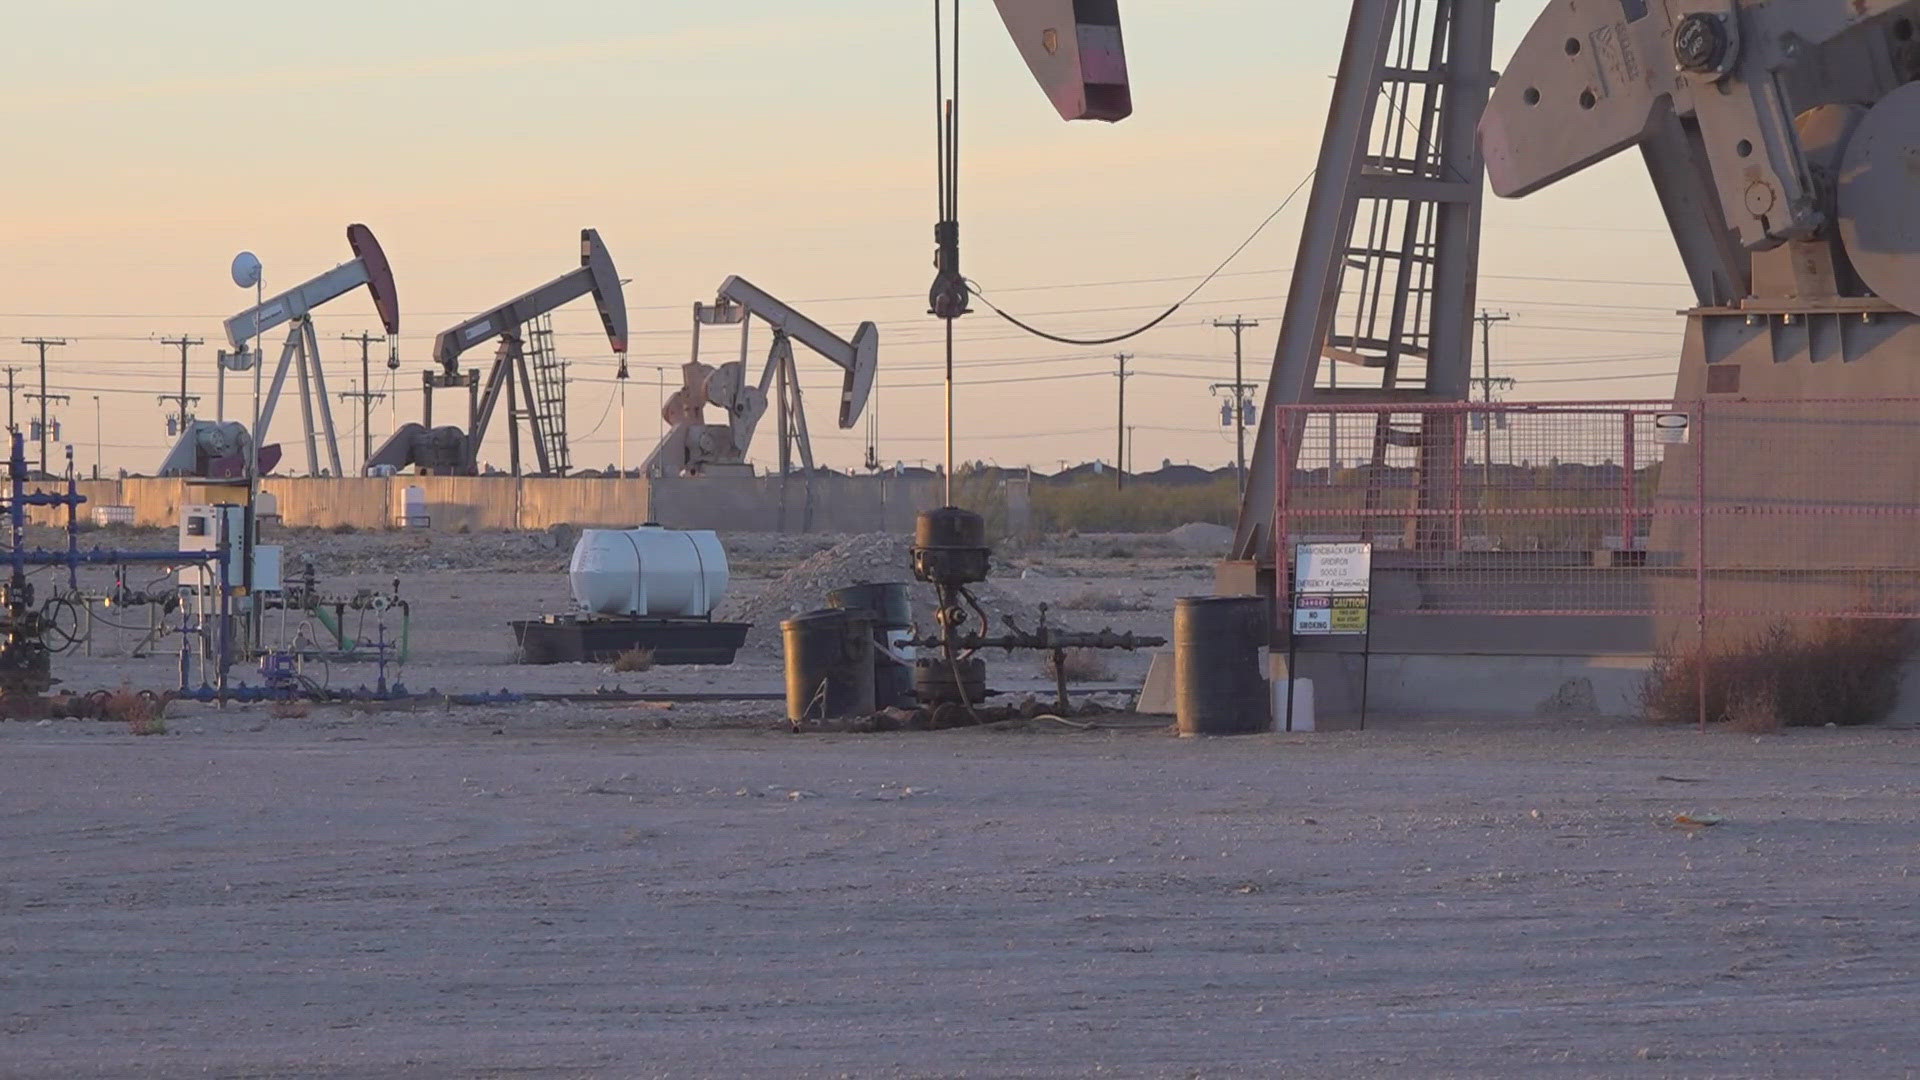 The Permian Basin produces over six million barrels of oil per day. Innovation has allowed for more efficiency, but pressure on the industry is impacting rig count.